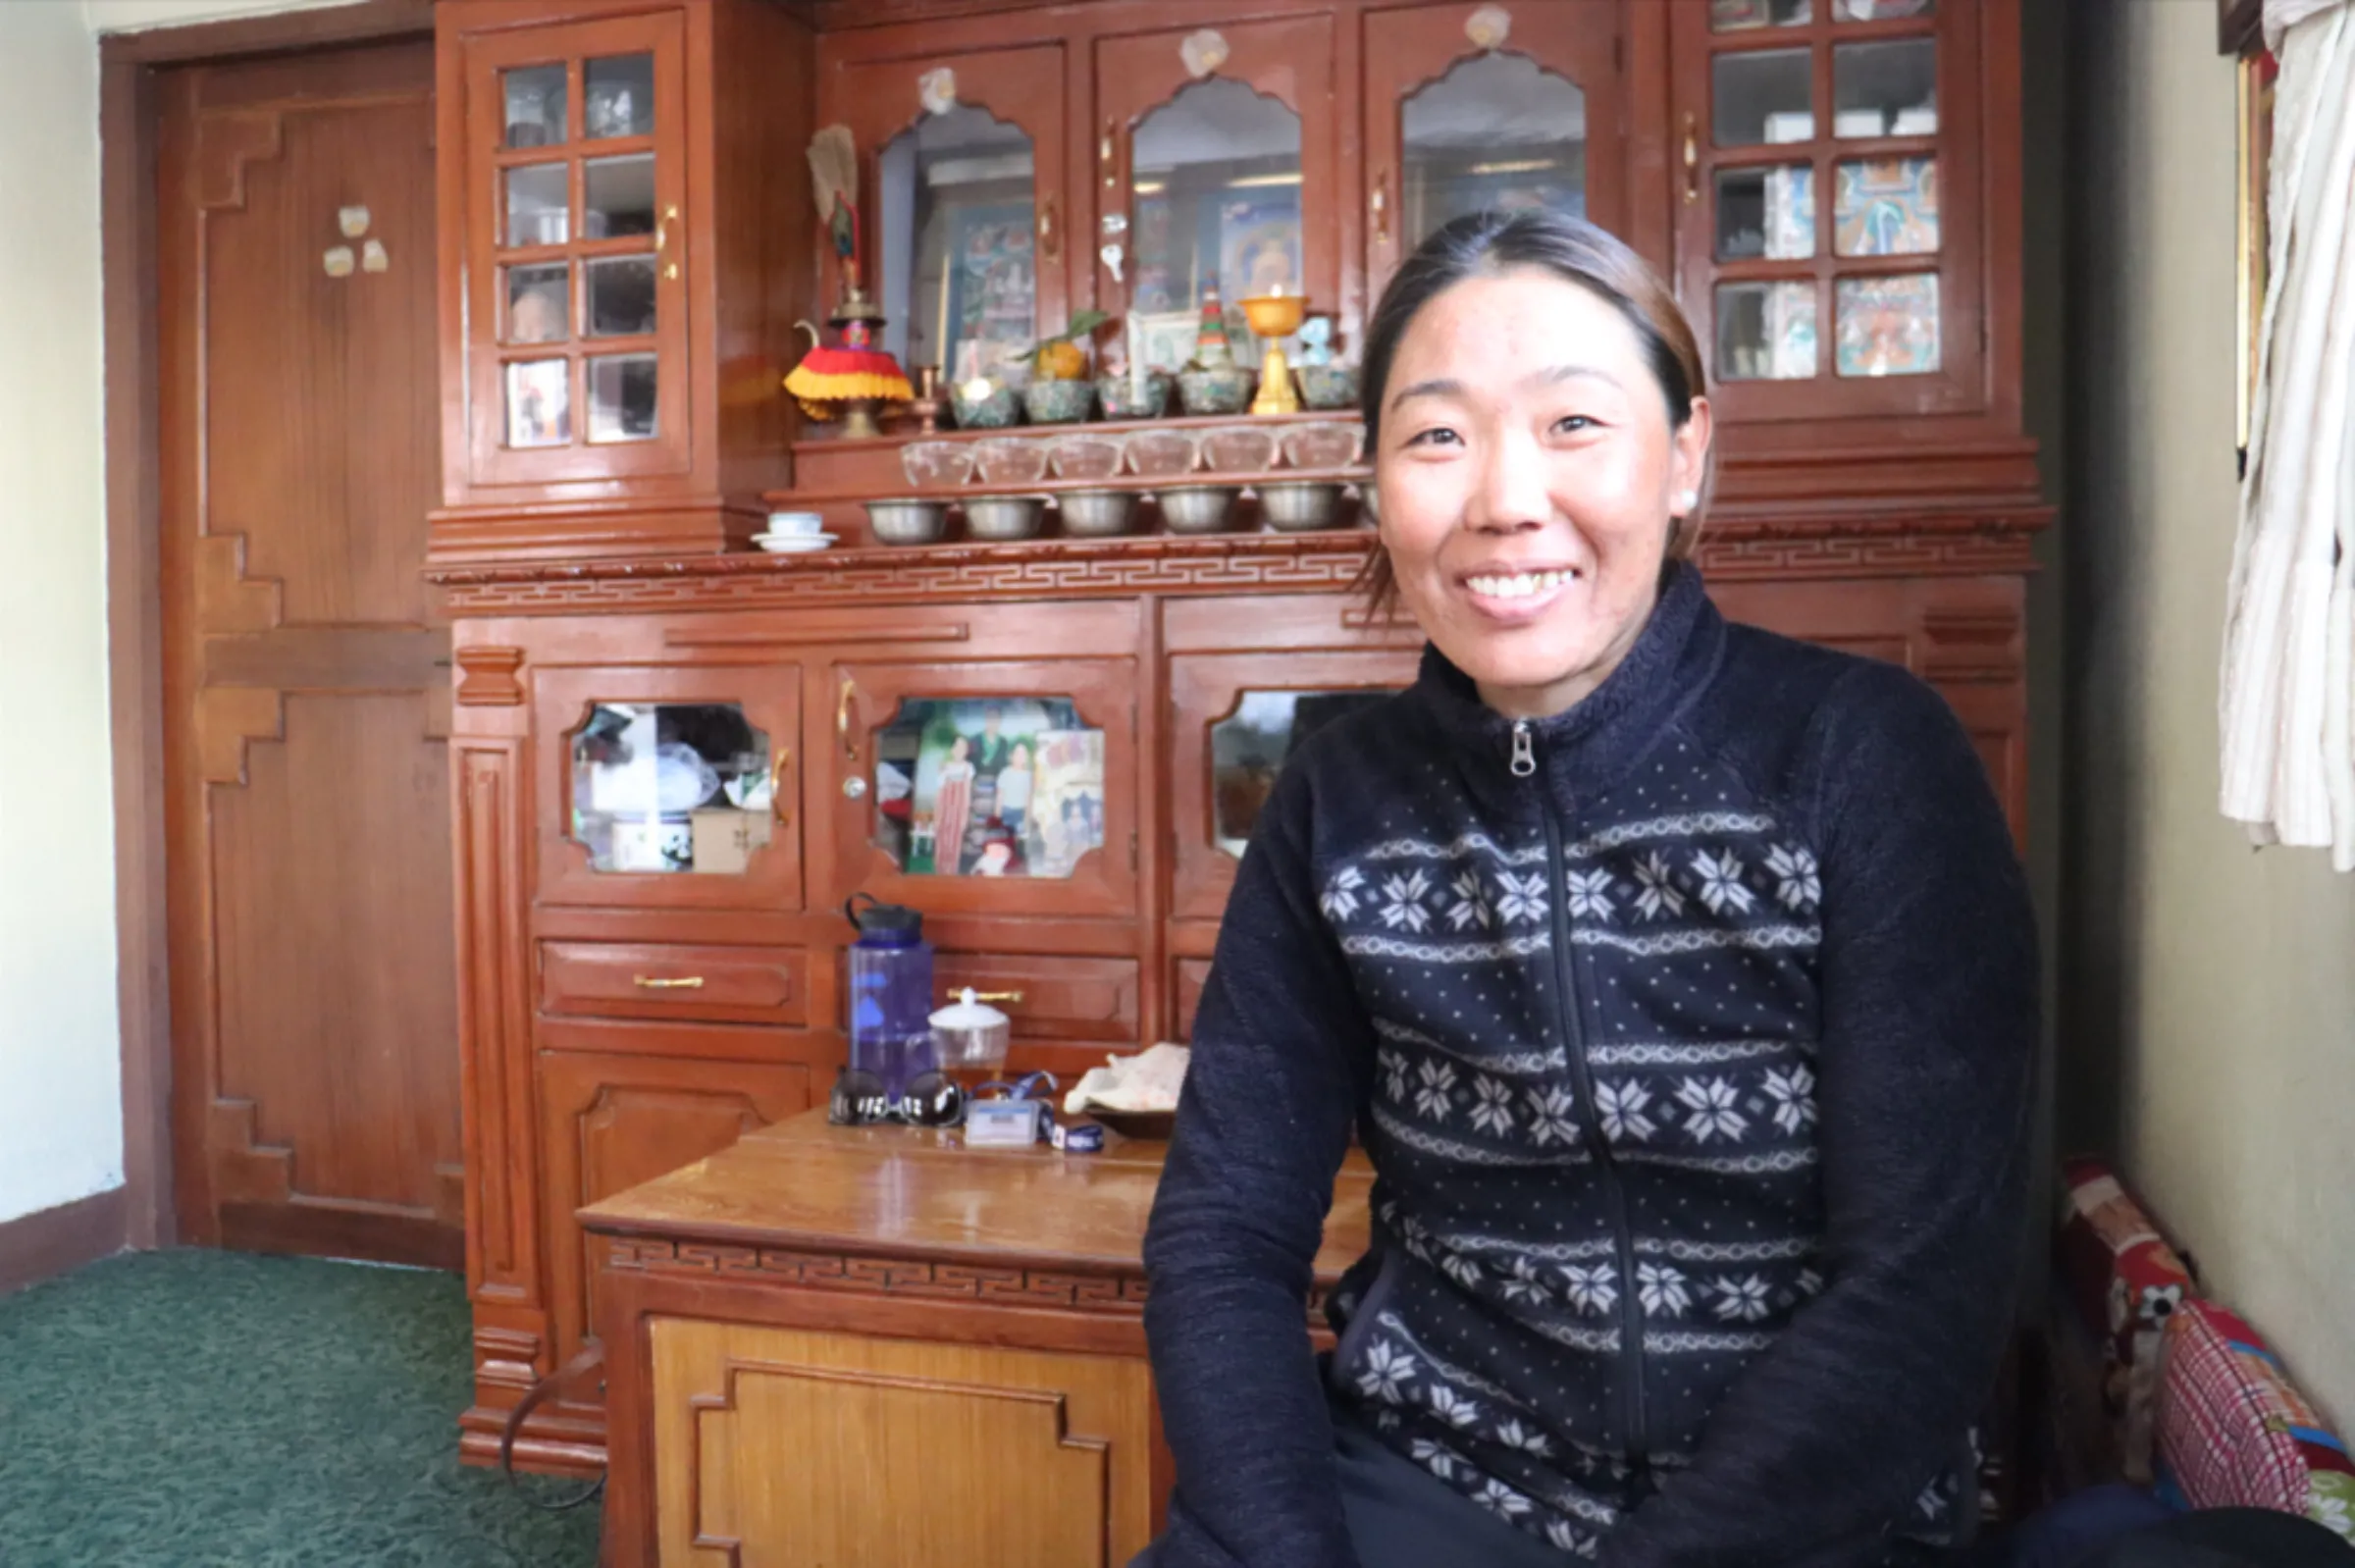 Nima Sherpa, her husband had been killed due to massive avalanche in 2014 in Mount Everest, December 16, 2022